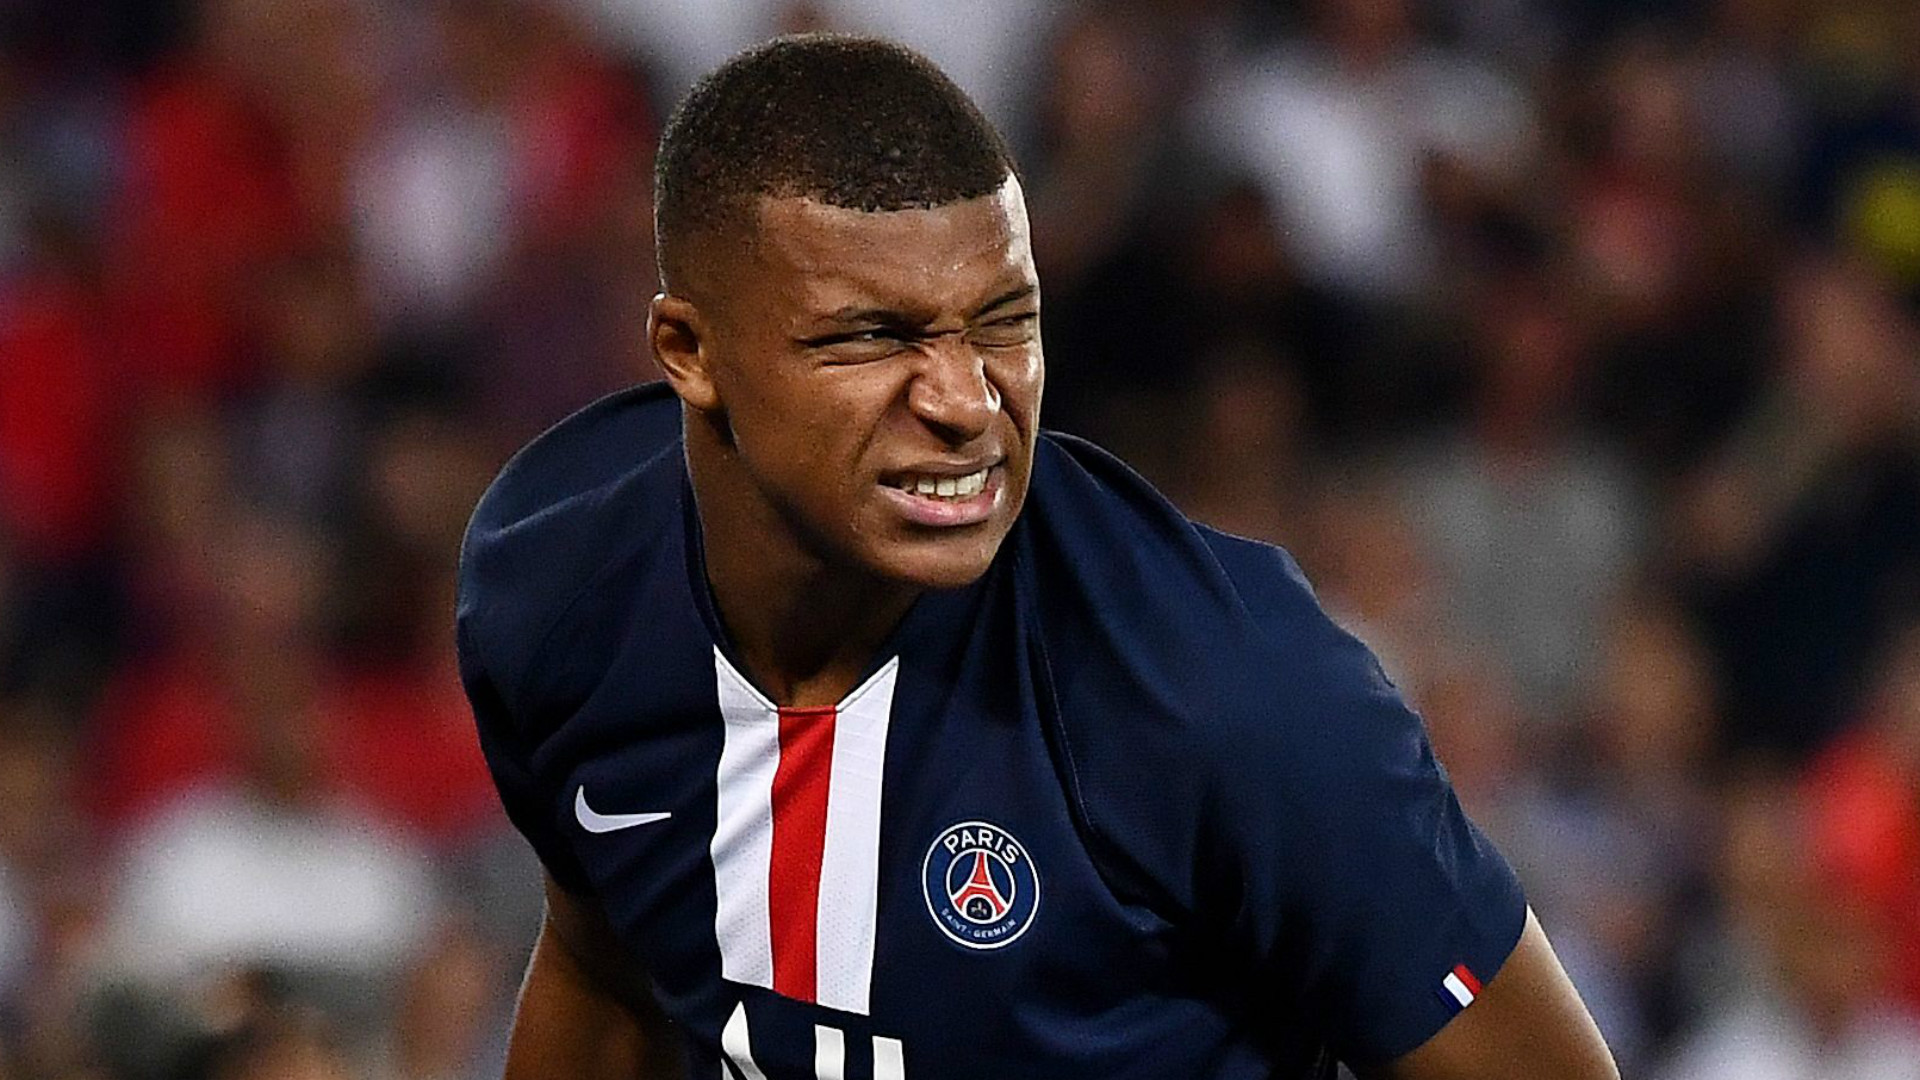 PSG star Kylian Mbappe ruled out for four weeks with hamstring injury